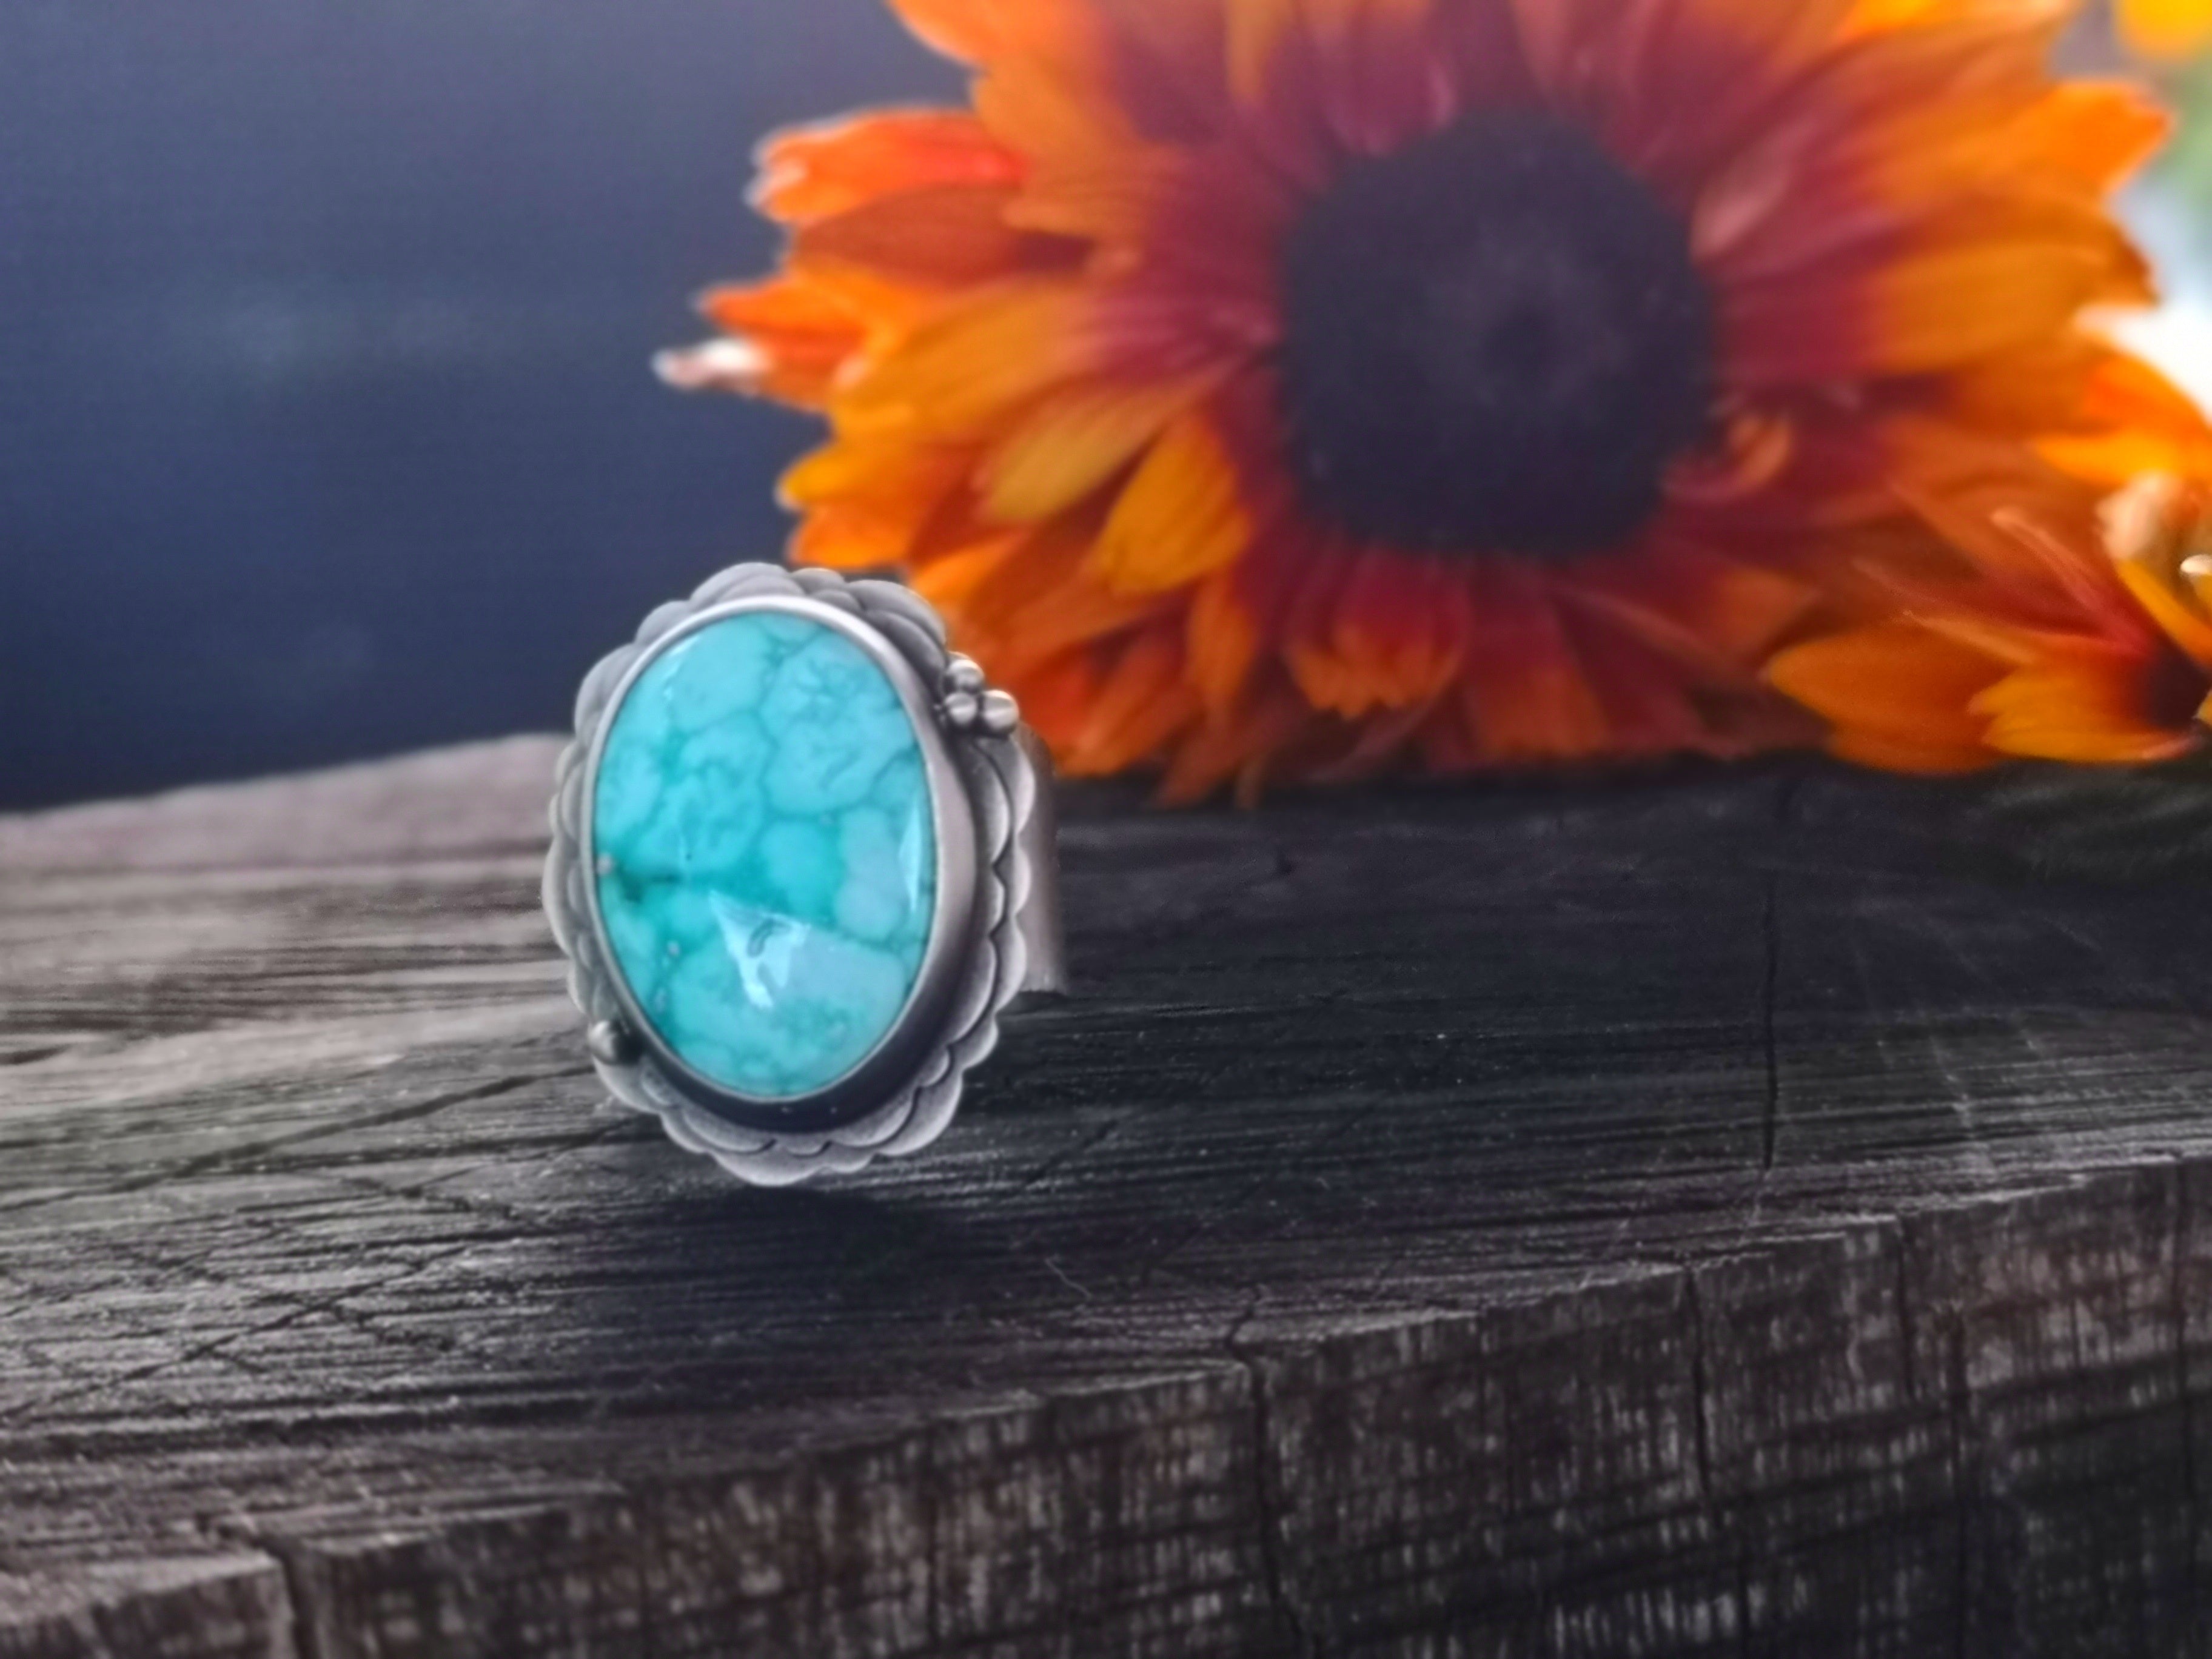 The Bloomer Ring - White Water Turquoise 7 US